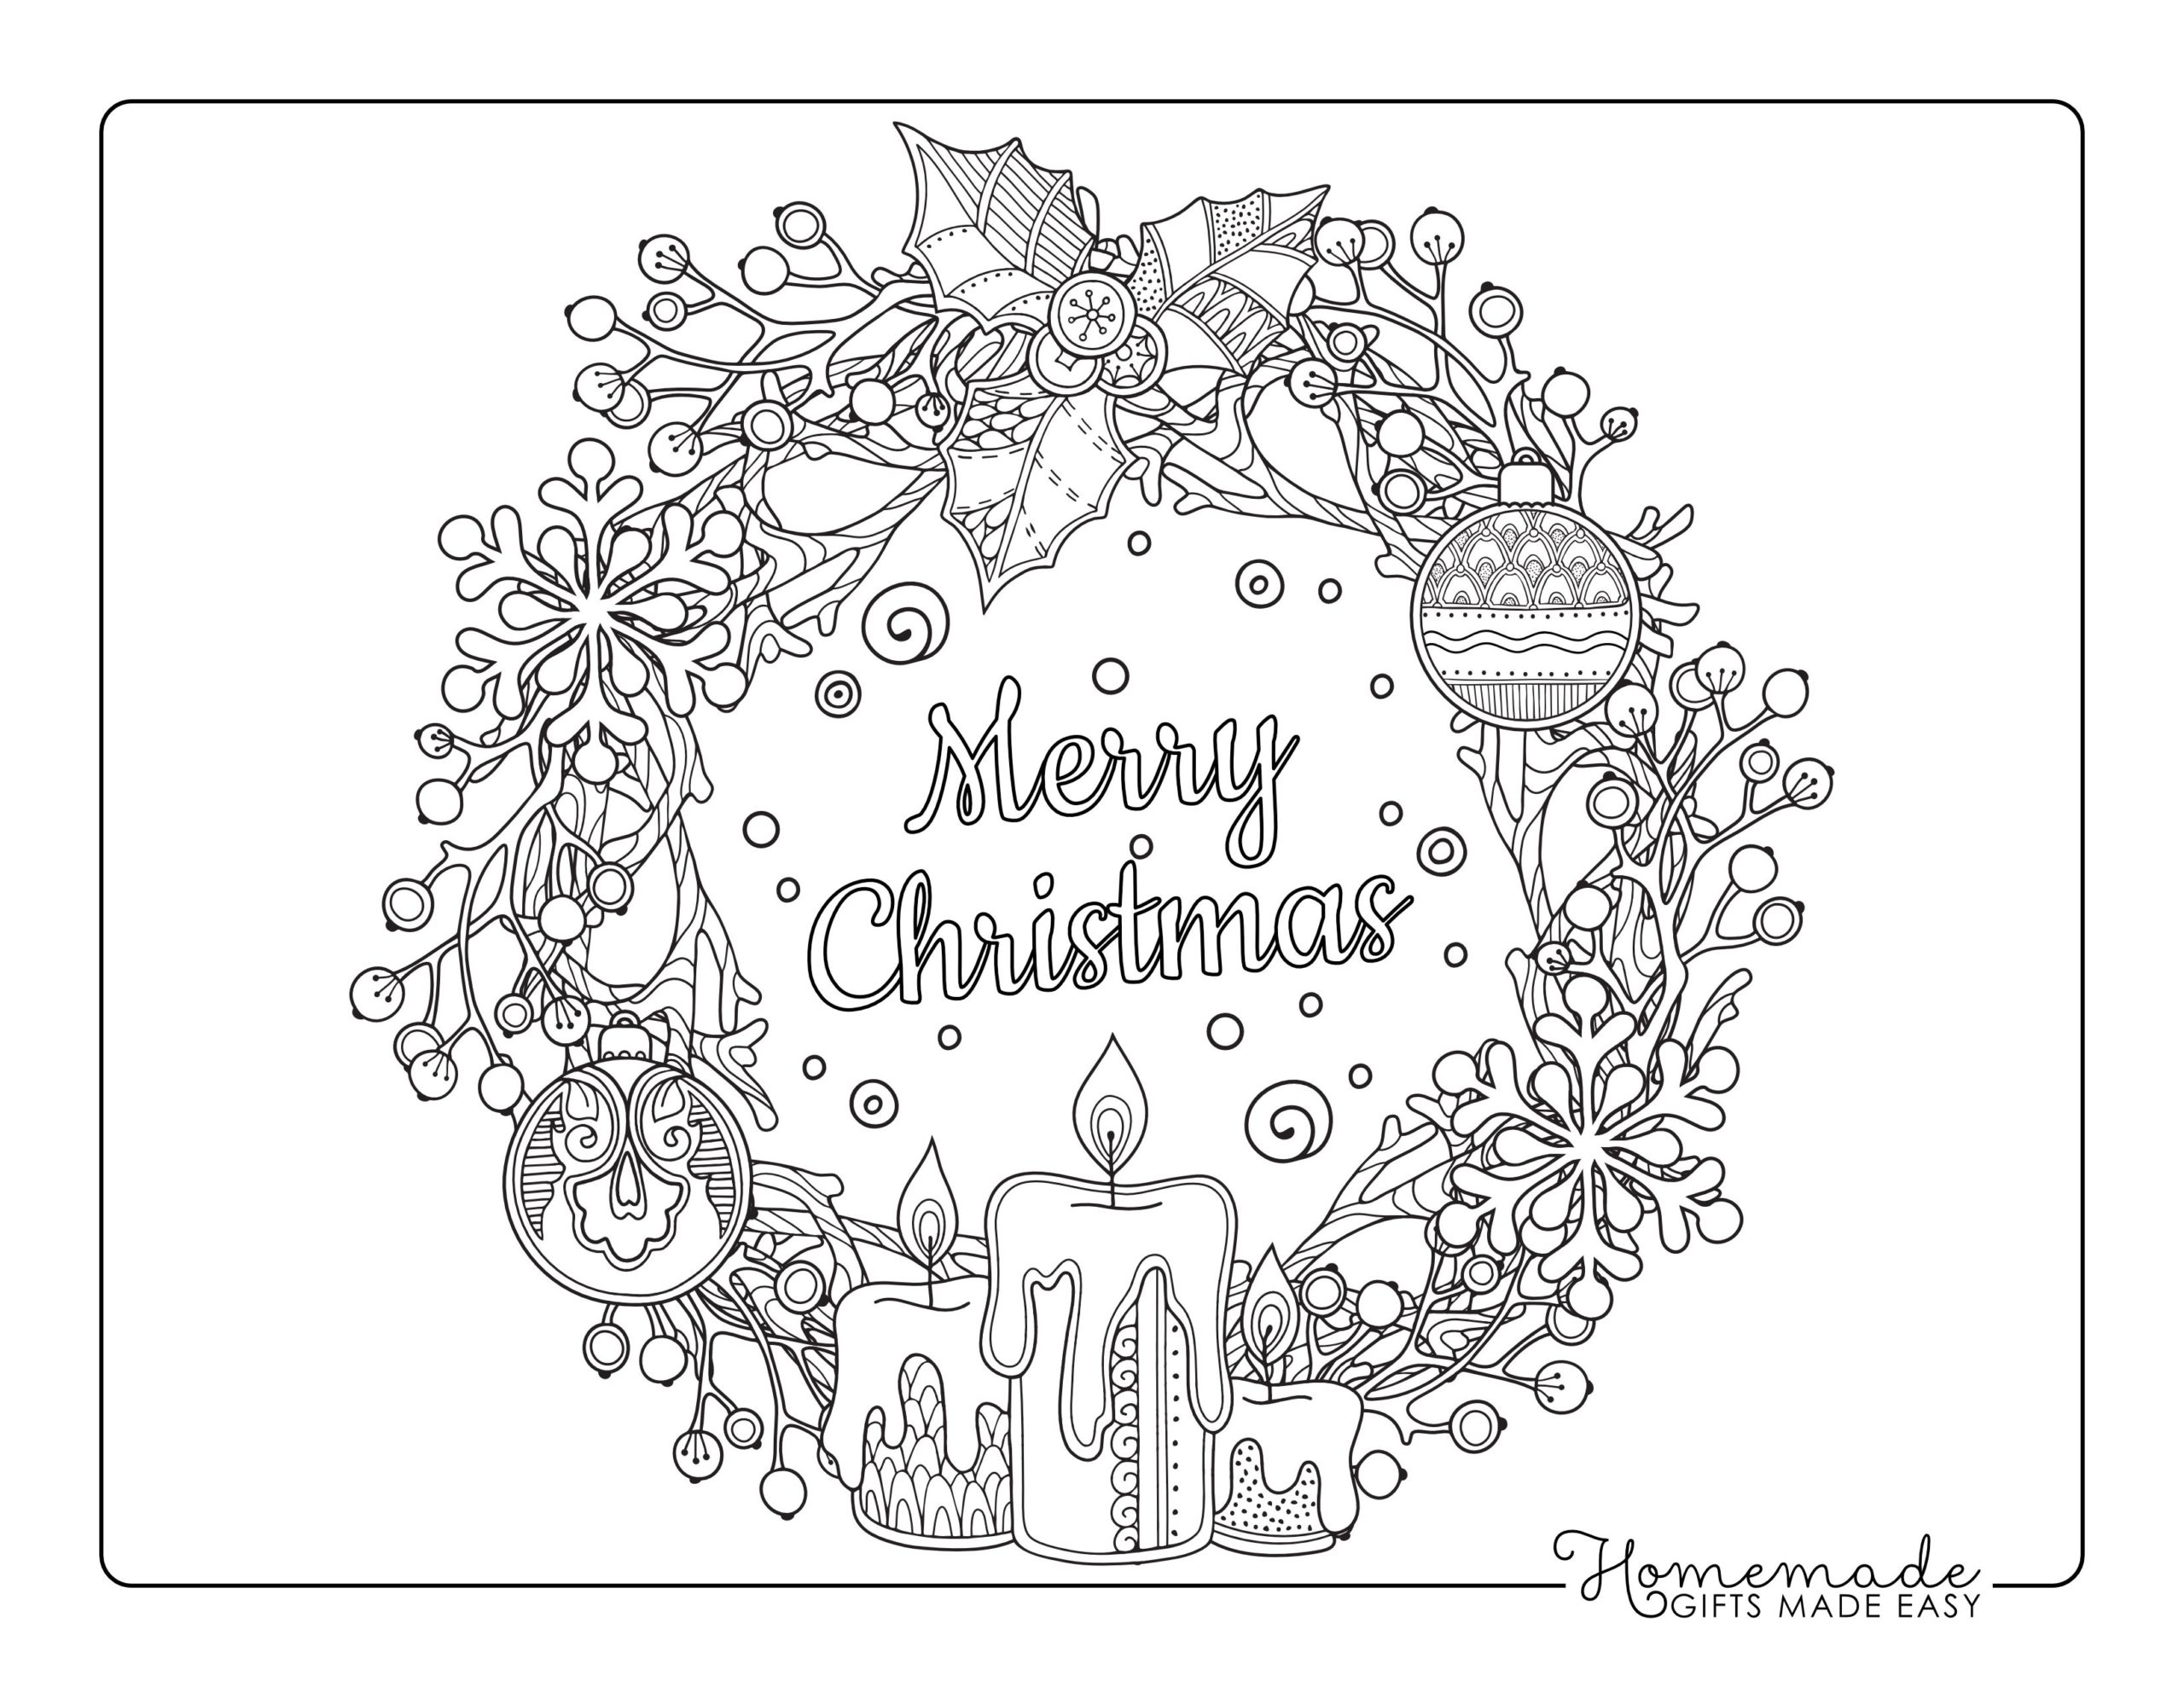 free-christmas-coloring-pages-for-adults-great-coloring